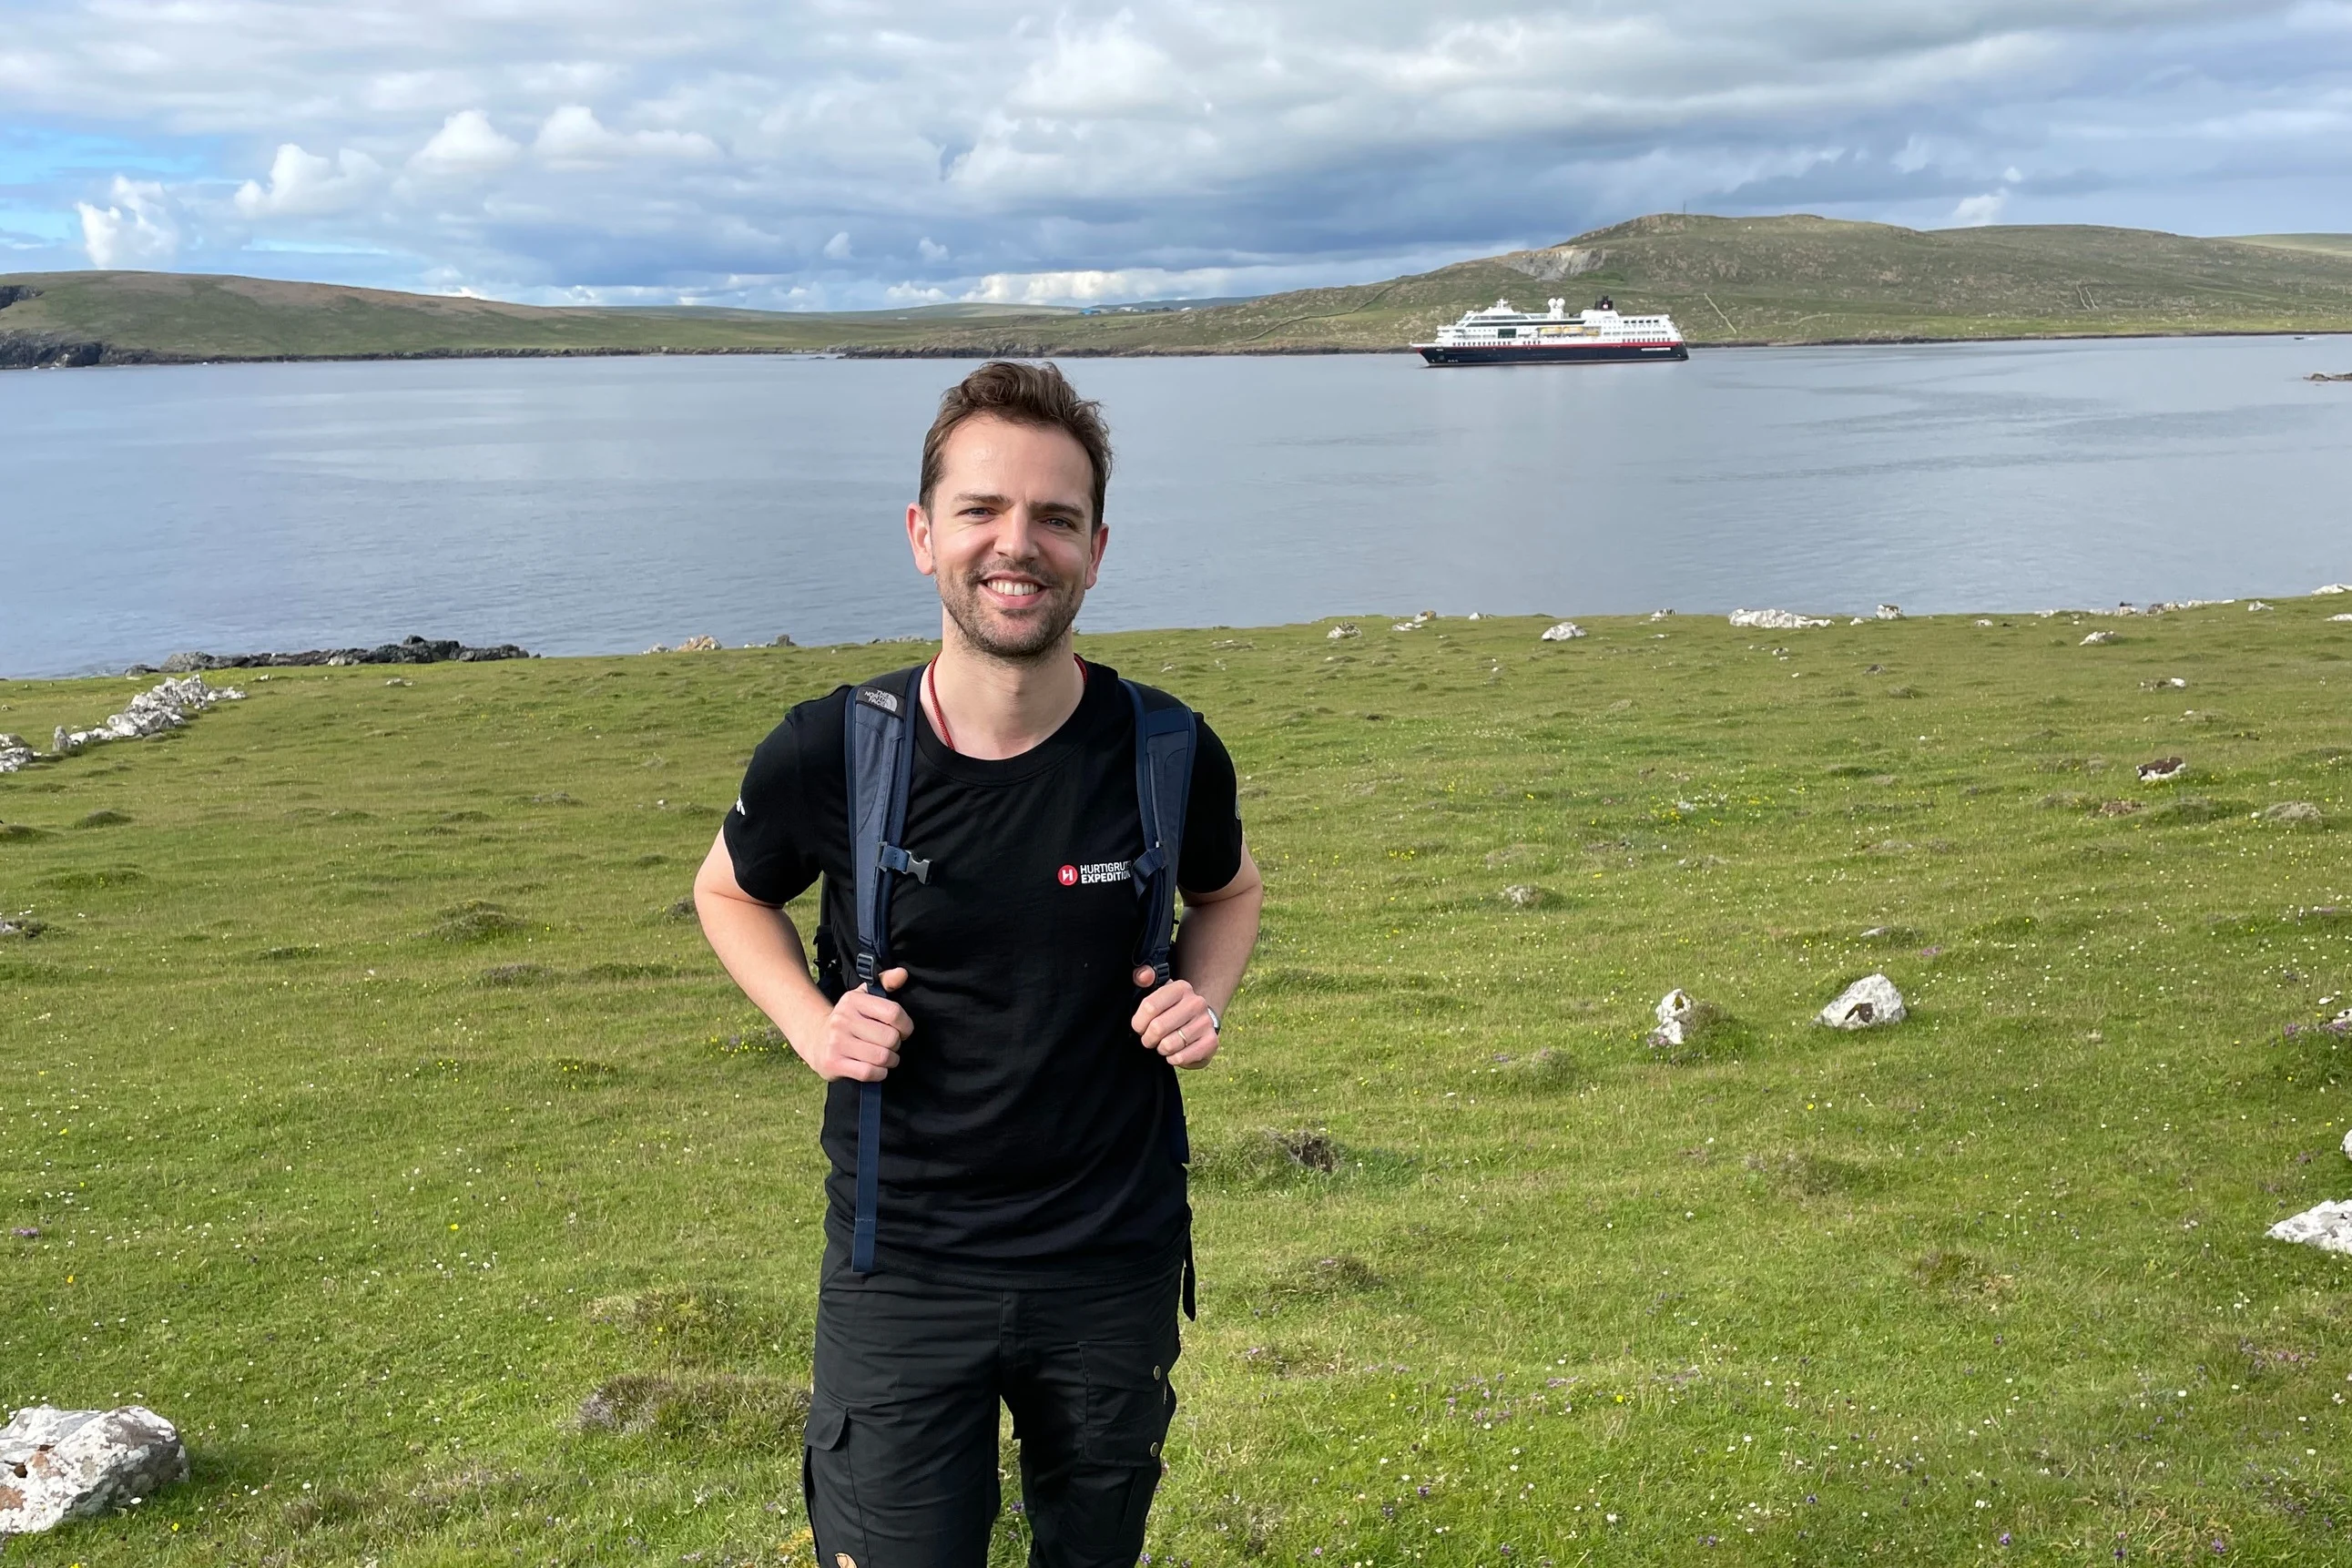 Dr. Henry Evans in front of MS Maud in Iceland. Credit: Dr. Henry Evans